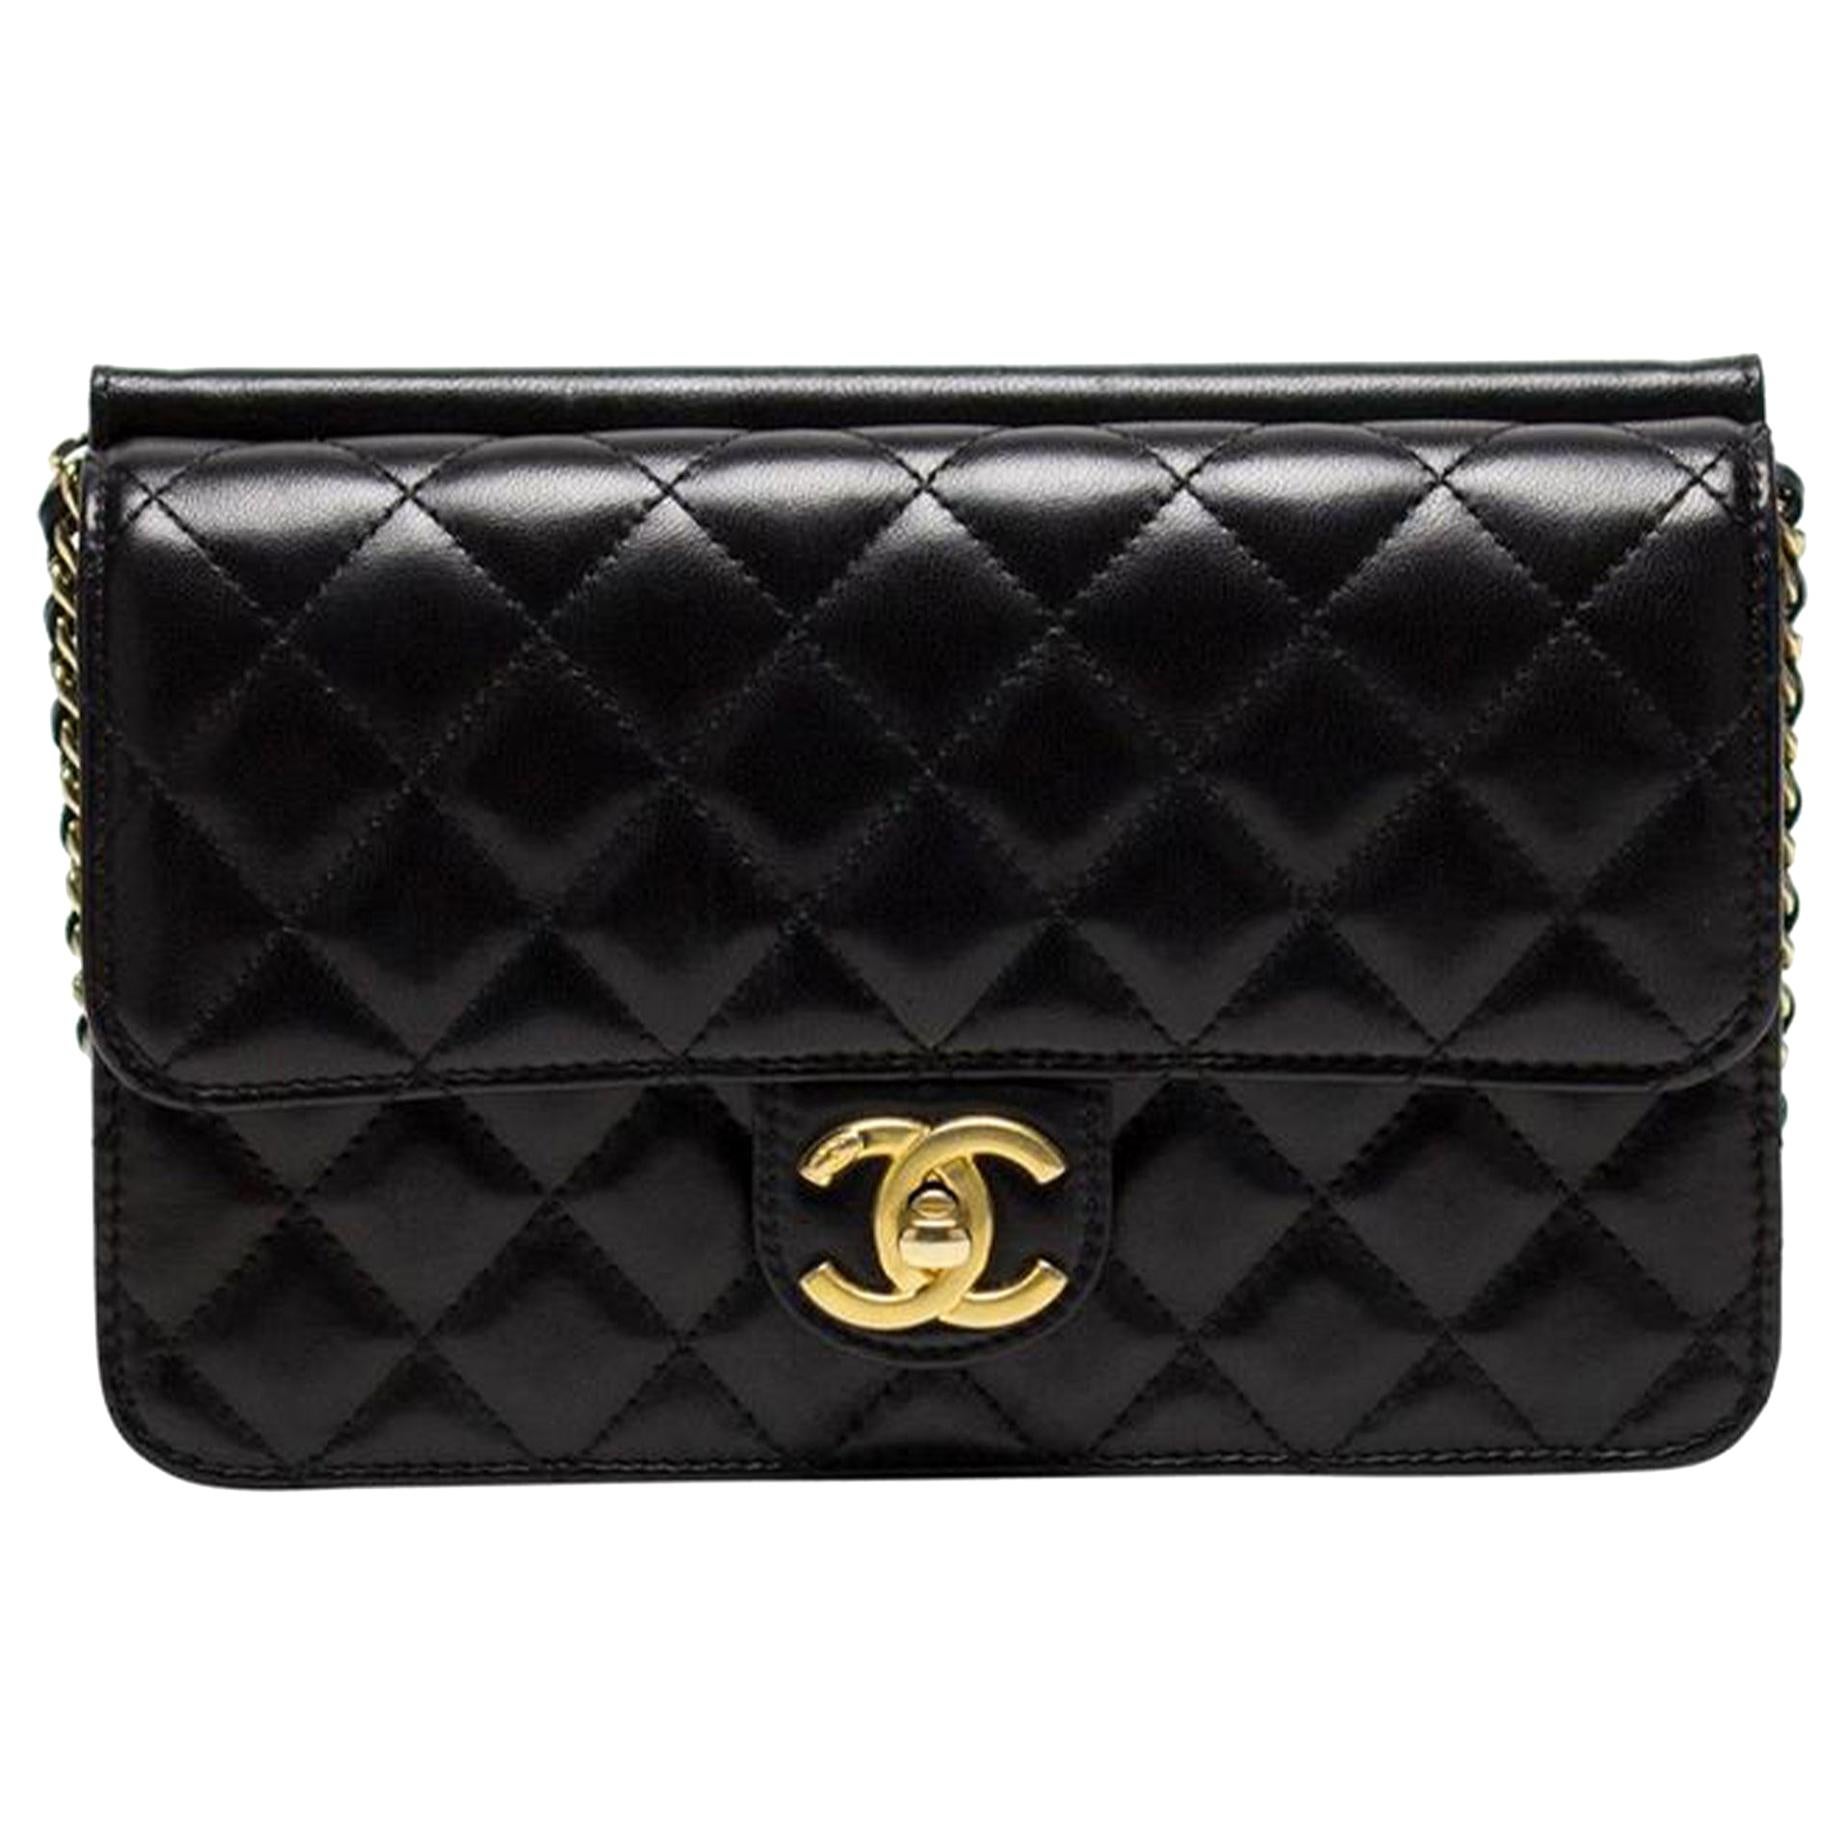 Chanel Classic Flap Quilted Black Lambskin Leather Cross Body Bag